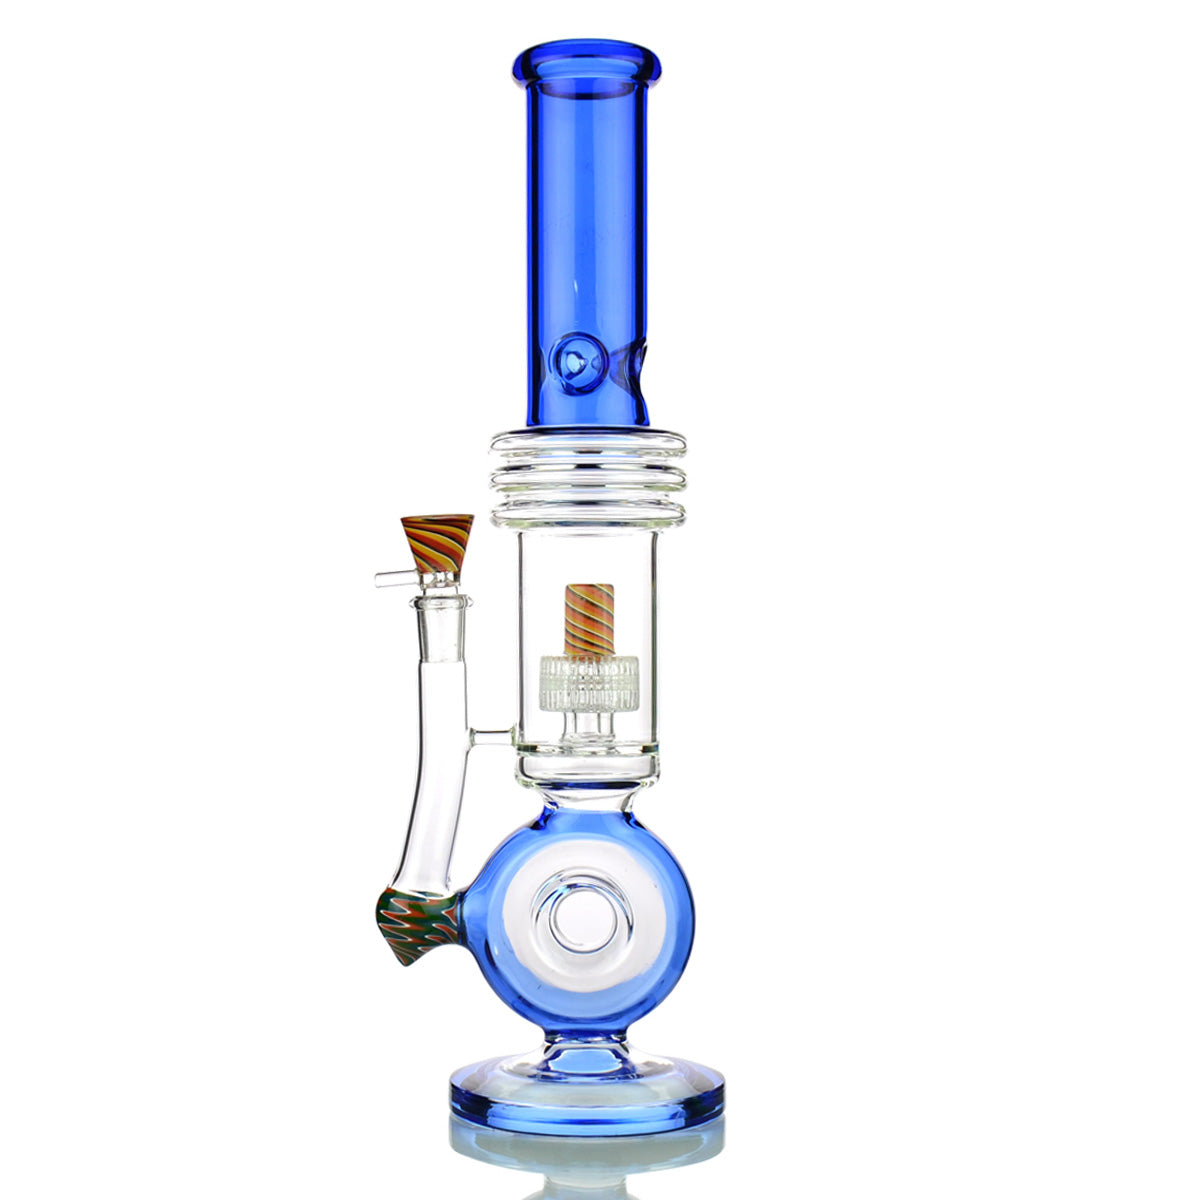 17" Donut Bong with Matrix Perc and 18mm Male Bowl